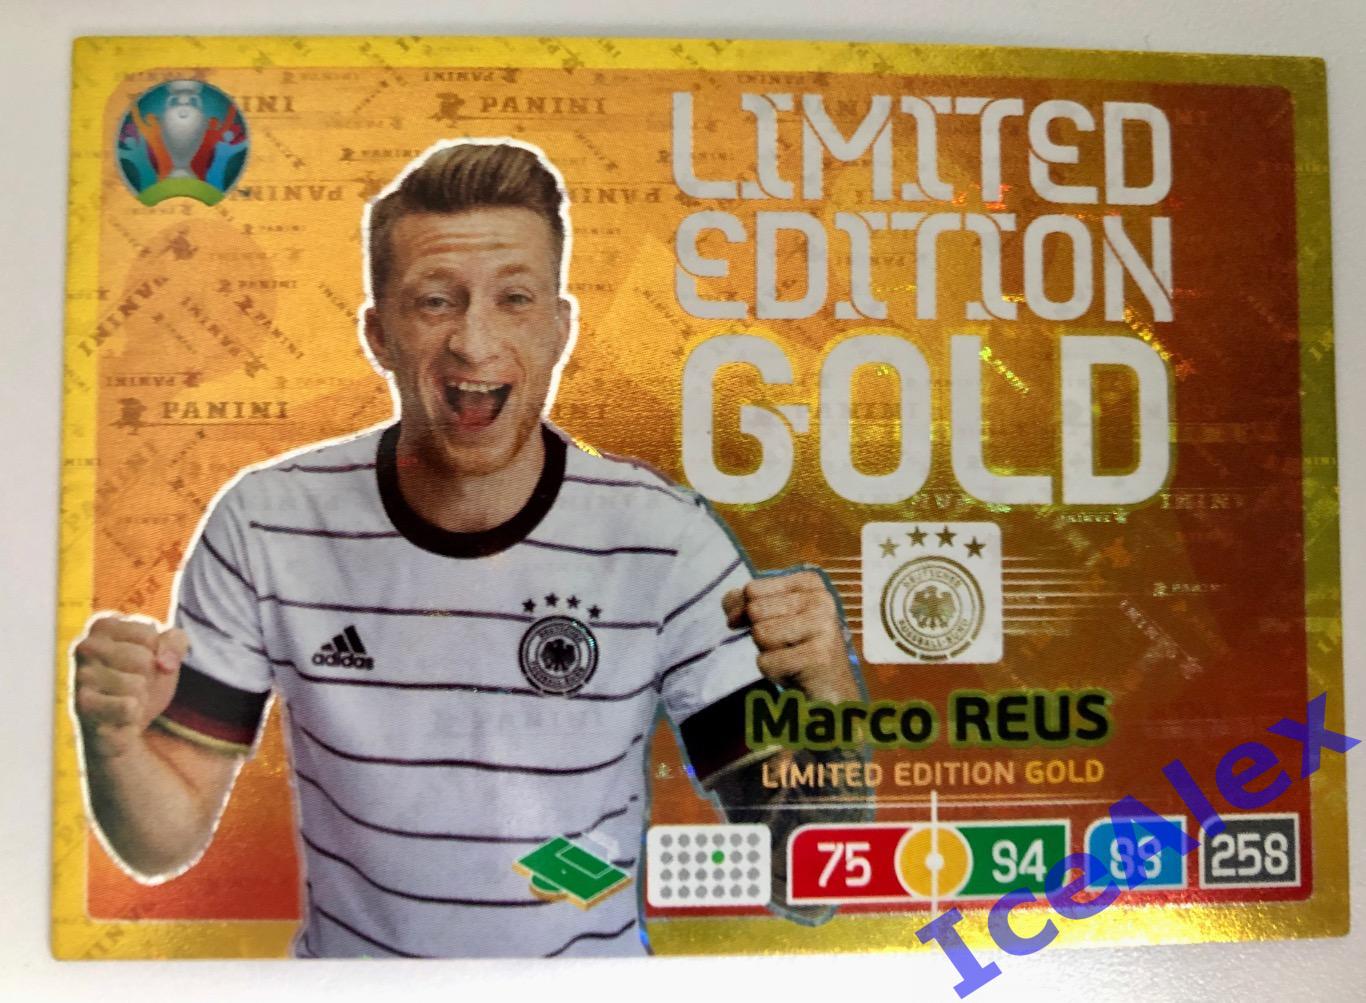 2020 Panini Adrenalyn XL, Euro Preview, Marco Reus, Gold Limited Edition